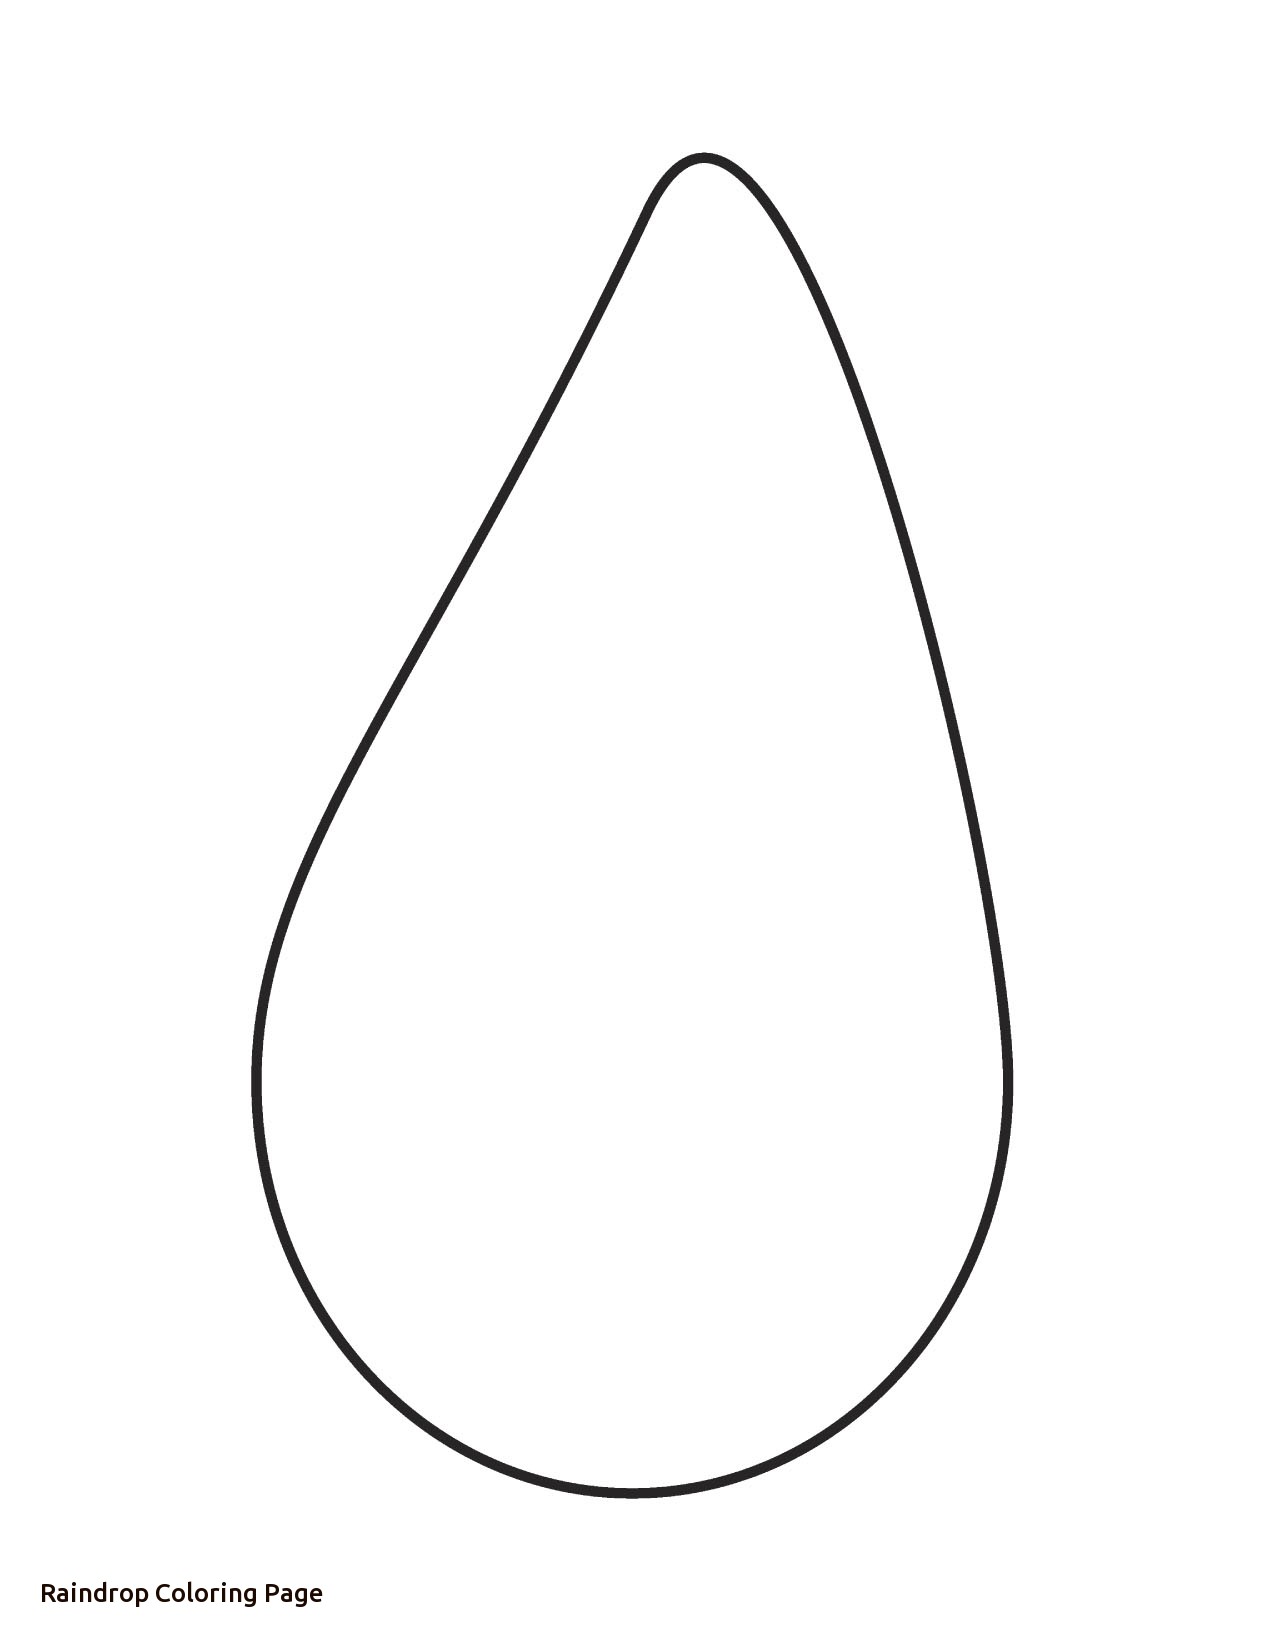 raindrop coloring page